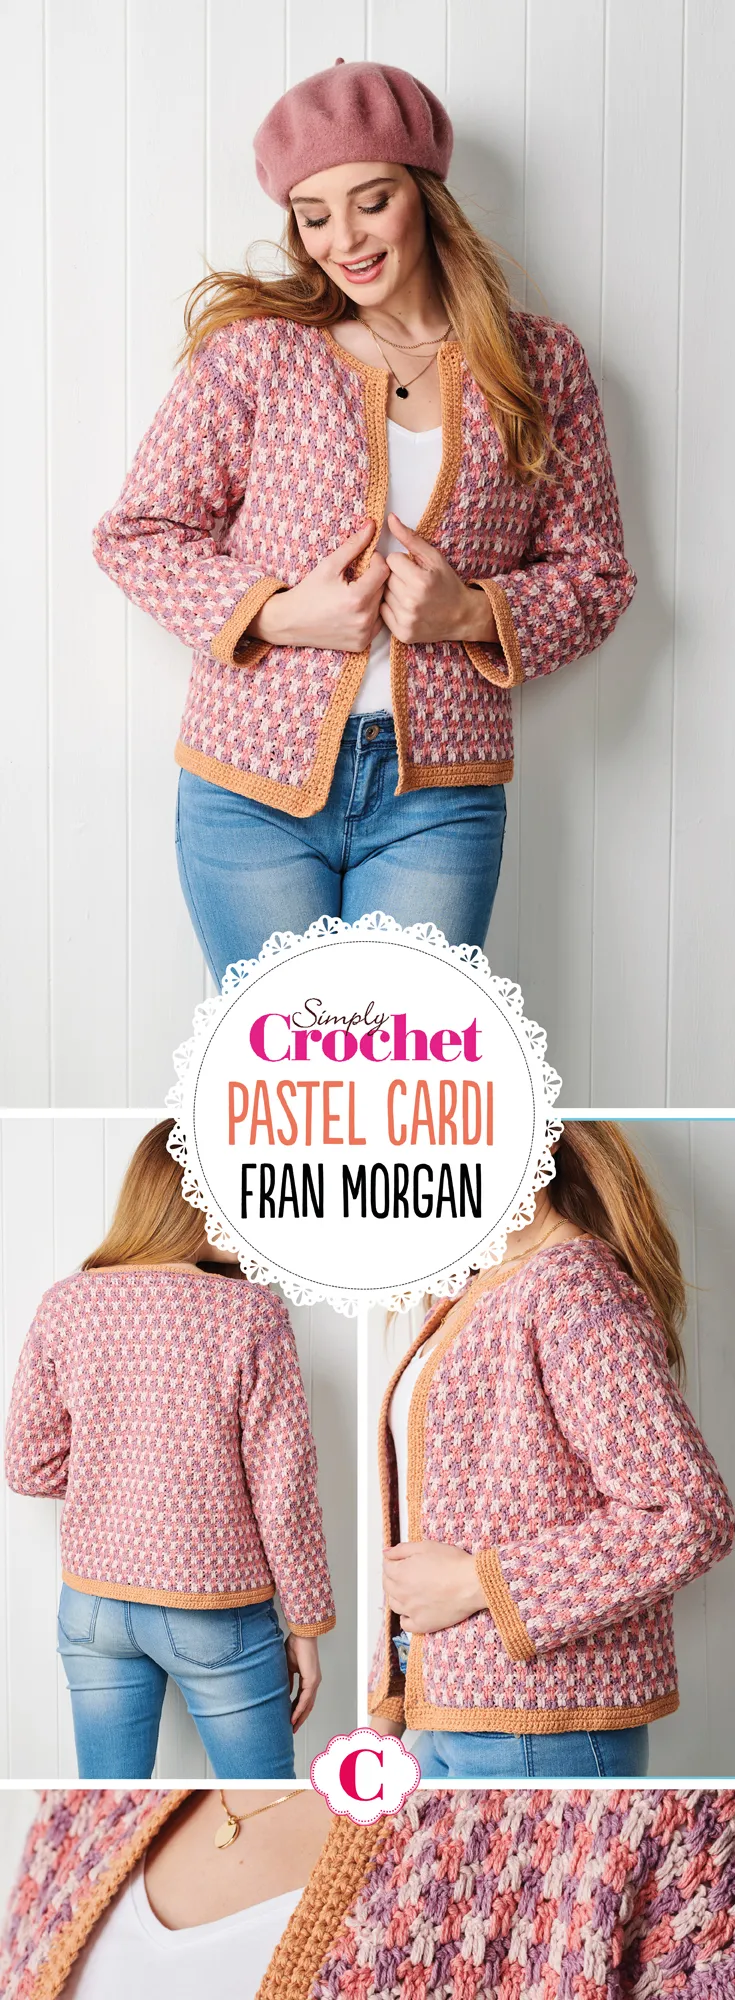 Simply_Crochet_issue79_pastel_cardi_pin